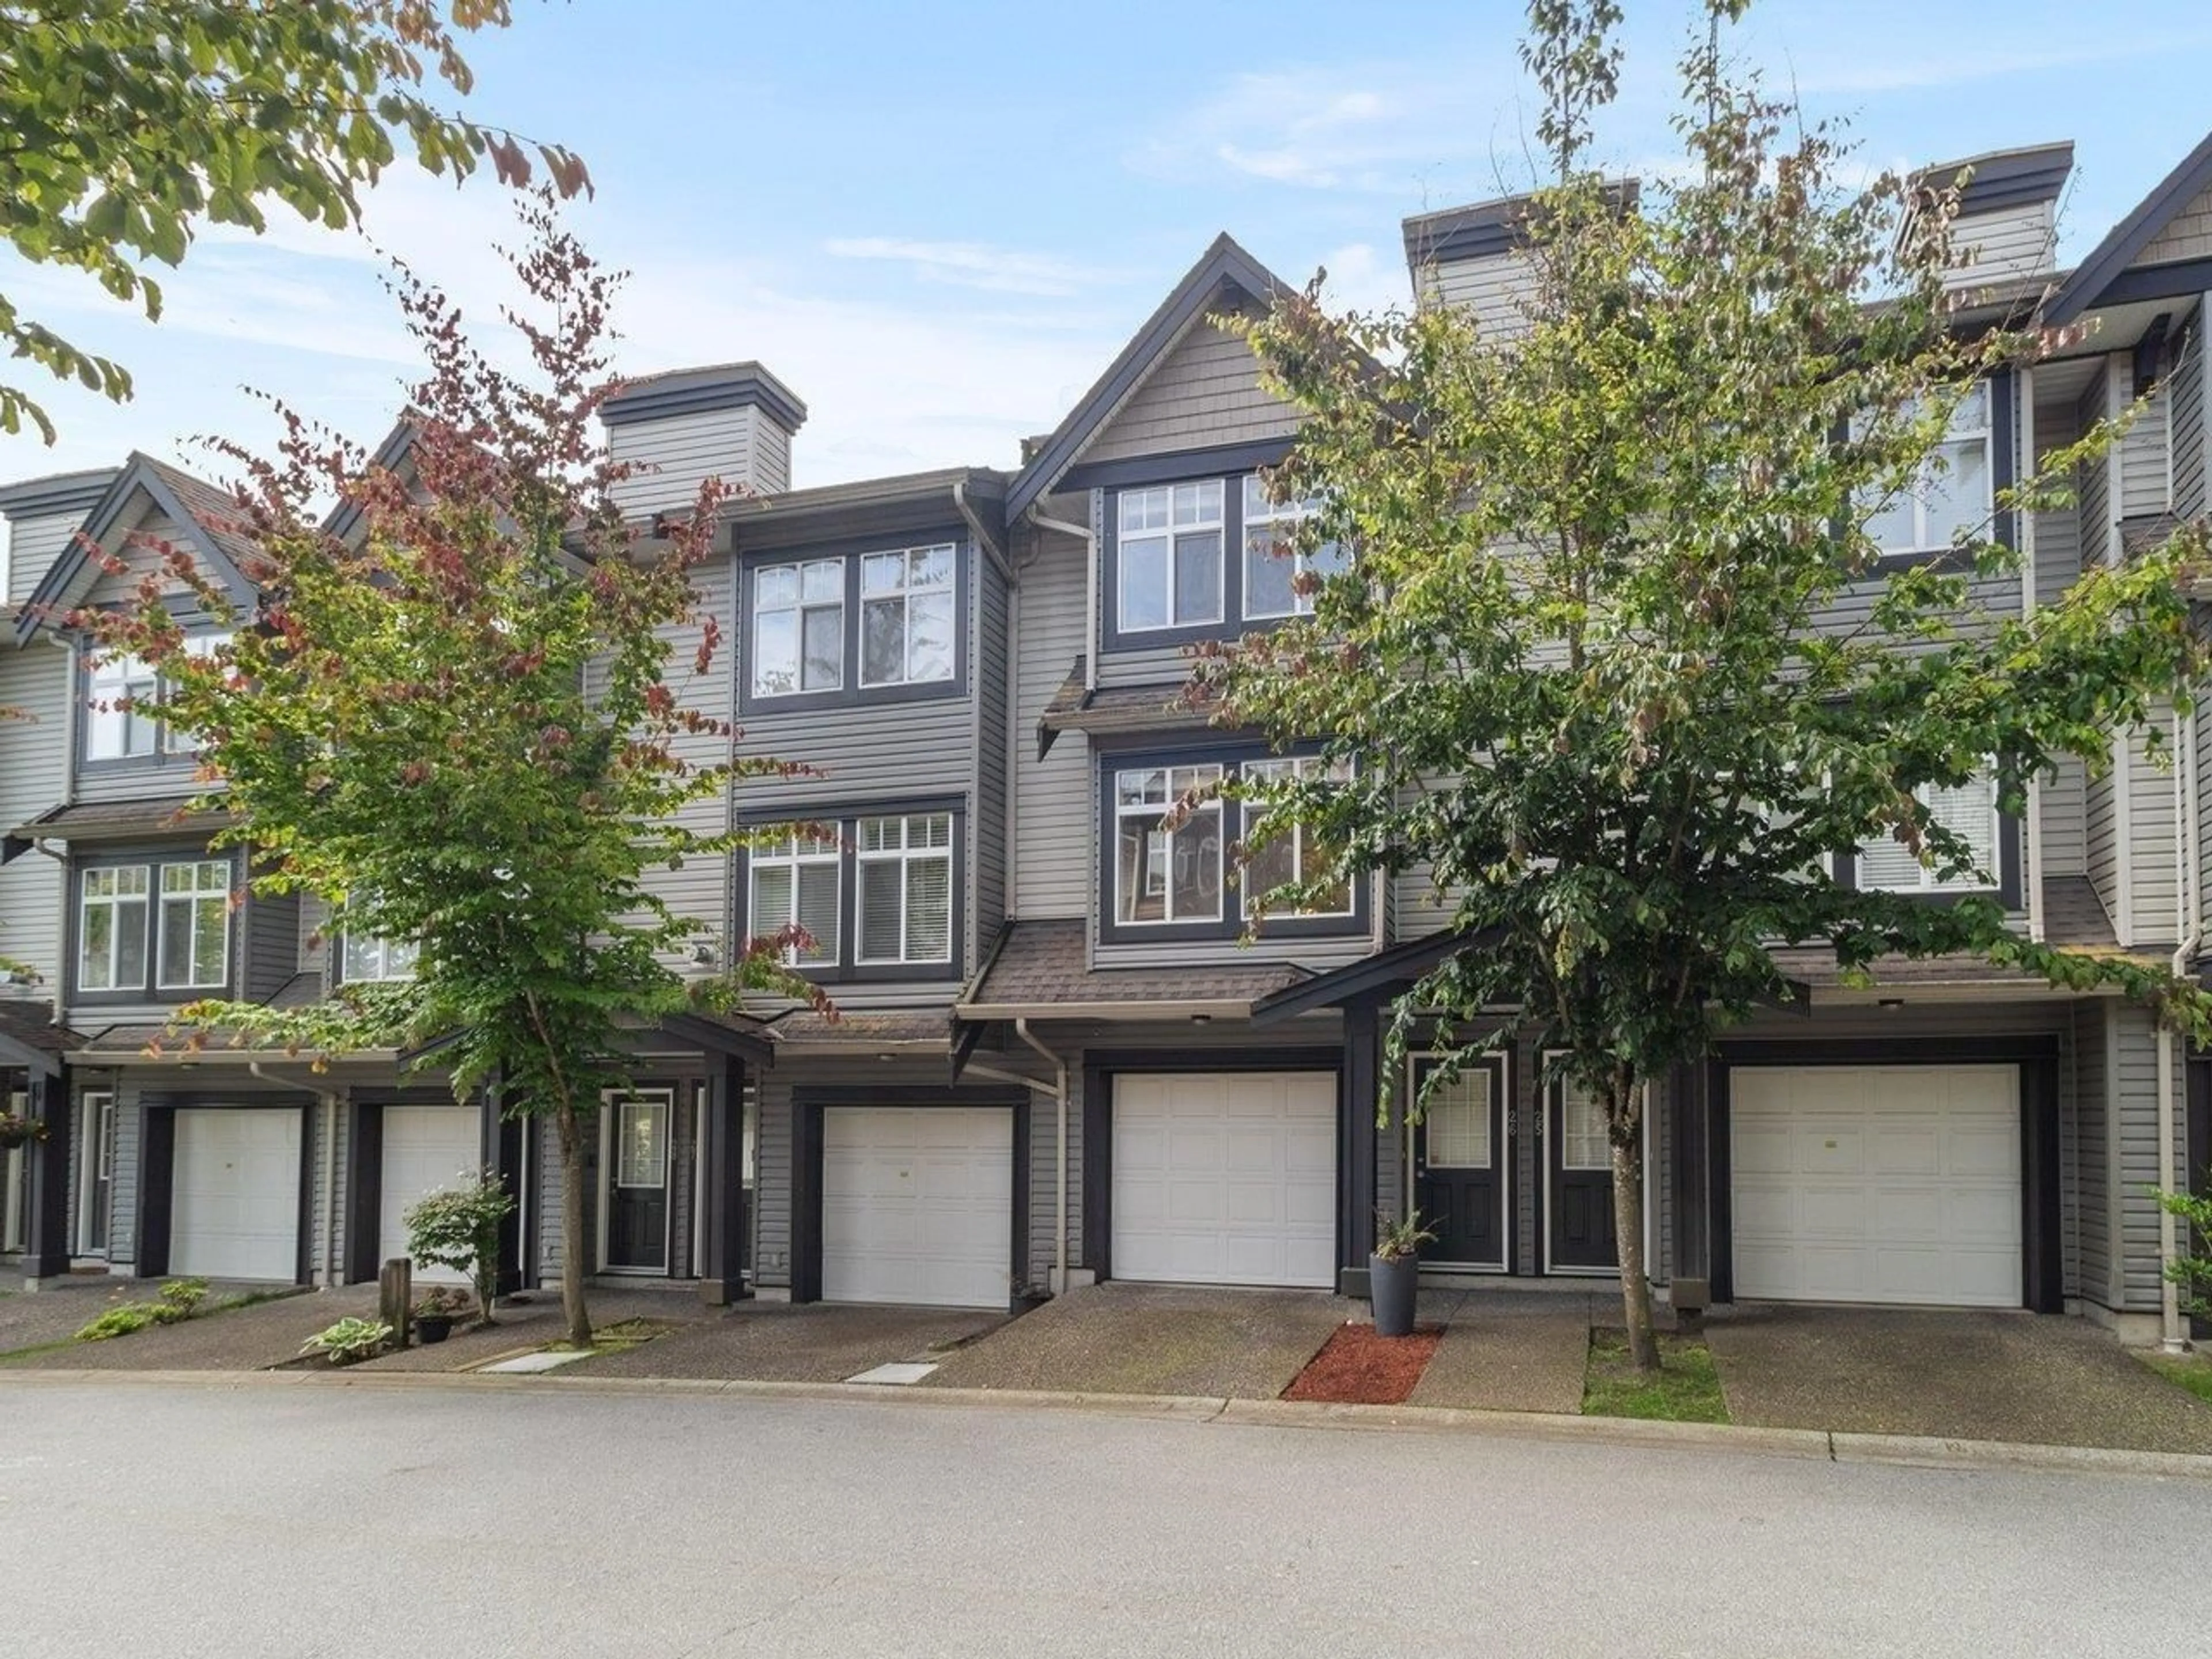 A pic from exterior of the house or condo for 26 19448 68 AVENUE, Surrey British Columbia V4N5V5